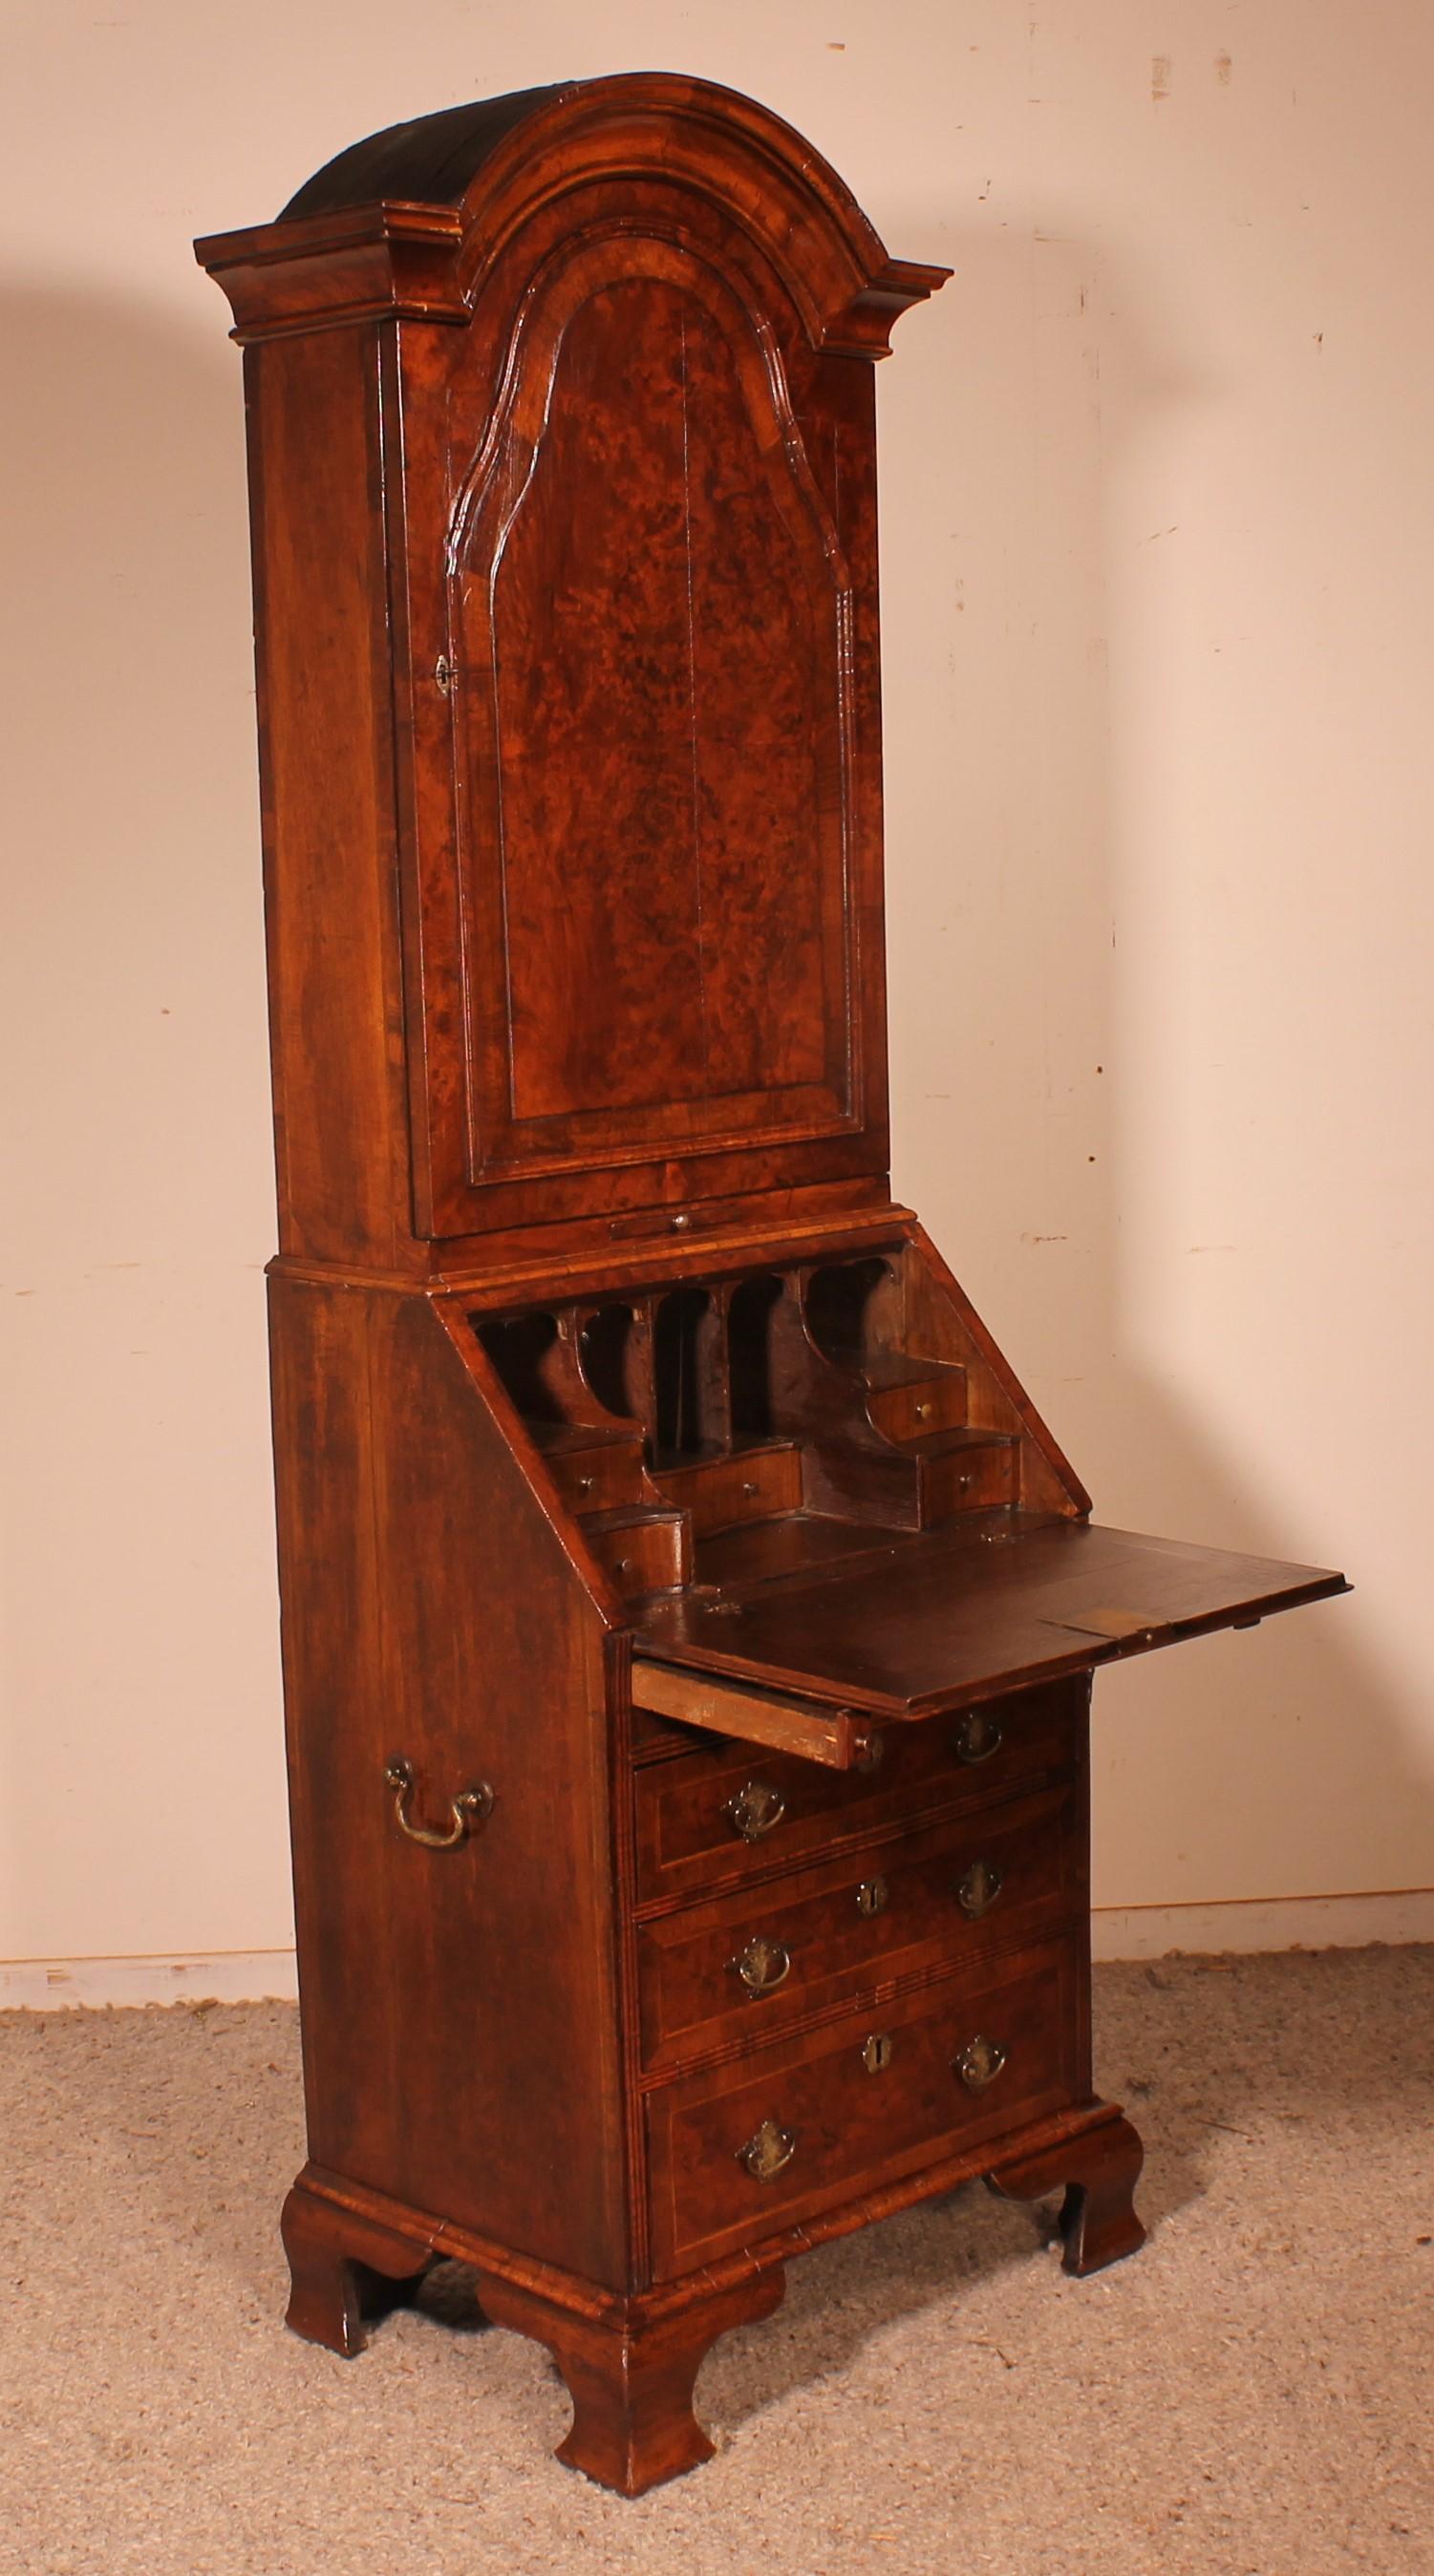 Small Secretary or Cabinet in Burl Walnut with Dome, 18 ° Century For Sale 2